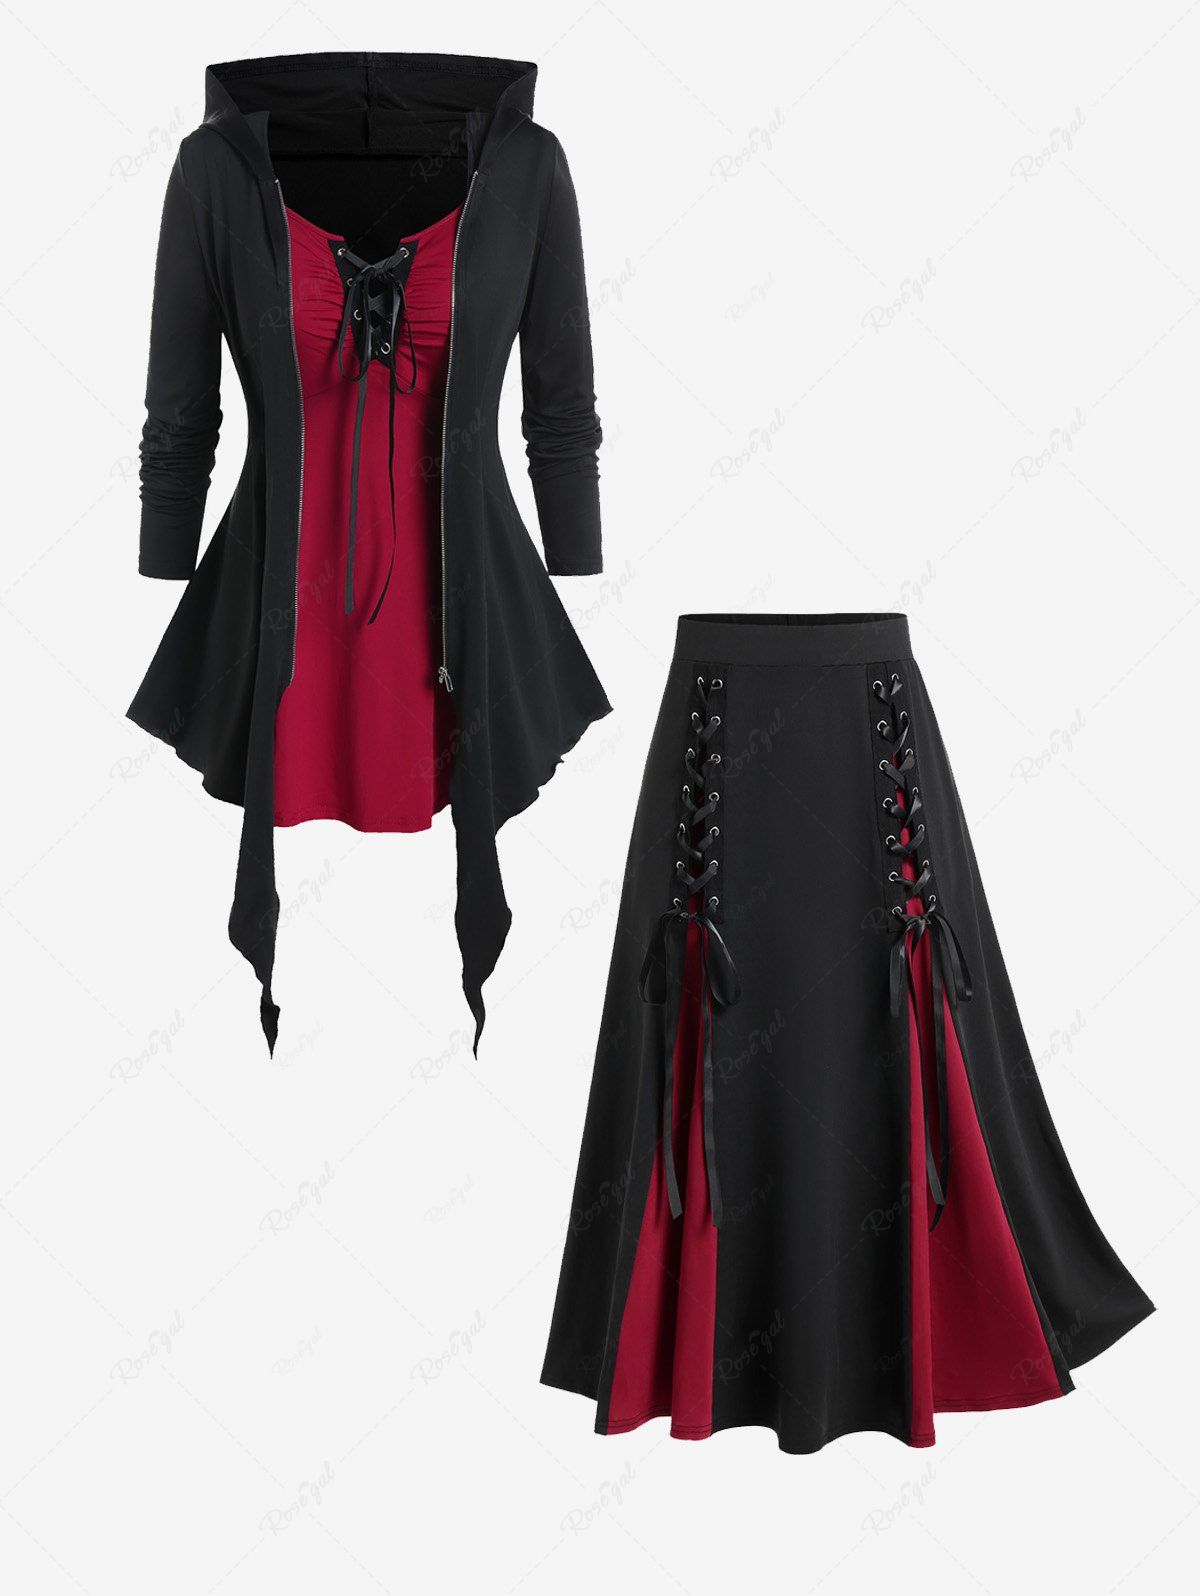 Affordable Lace Up Full Zipper Hooded Asymmetric Tee and Gothic Godet Hem Midi Skirt Outfit  